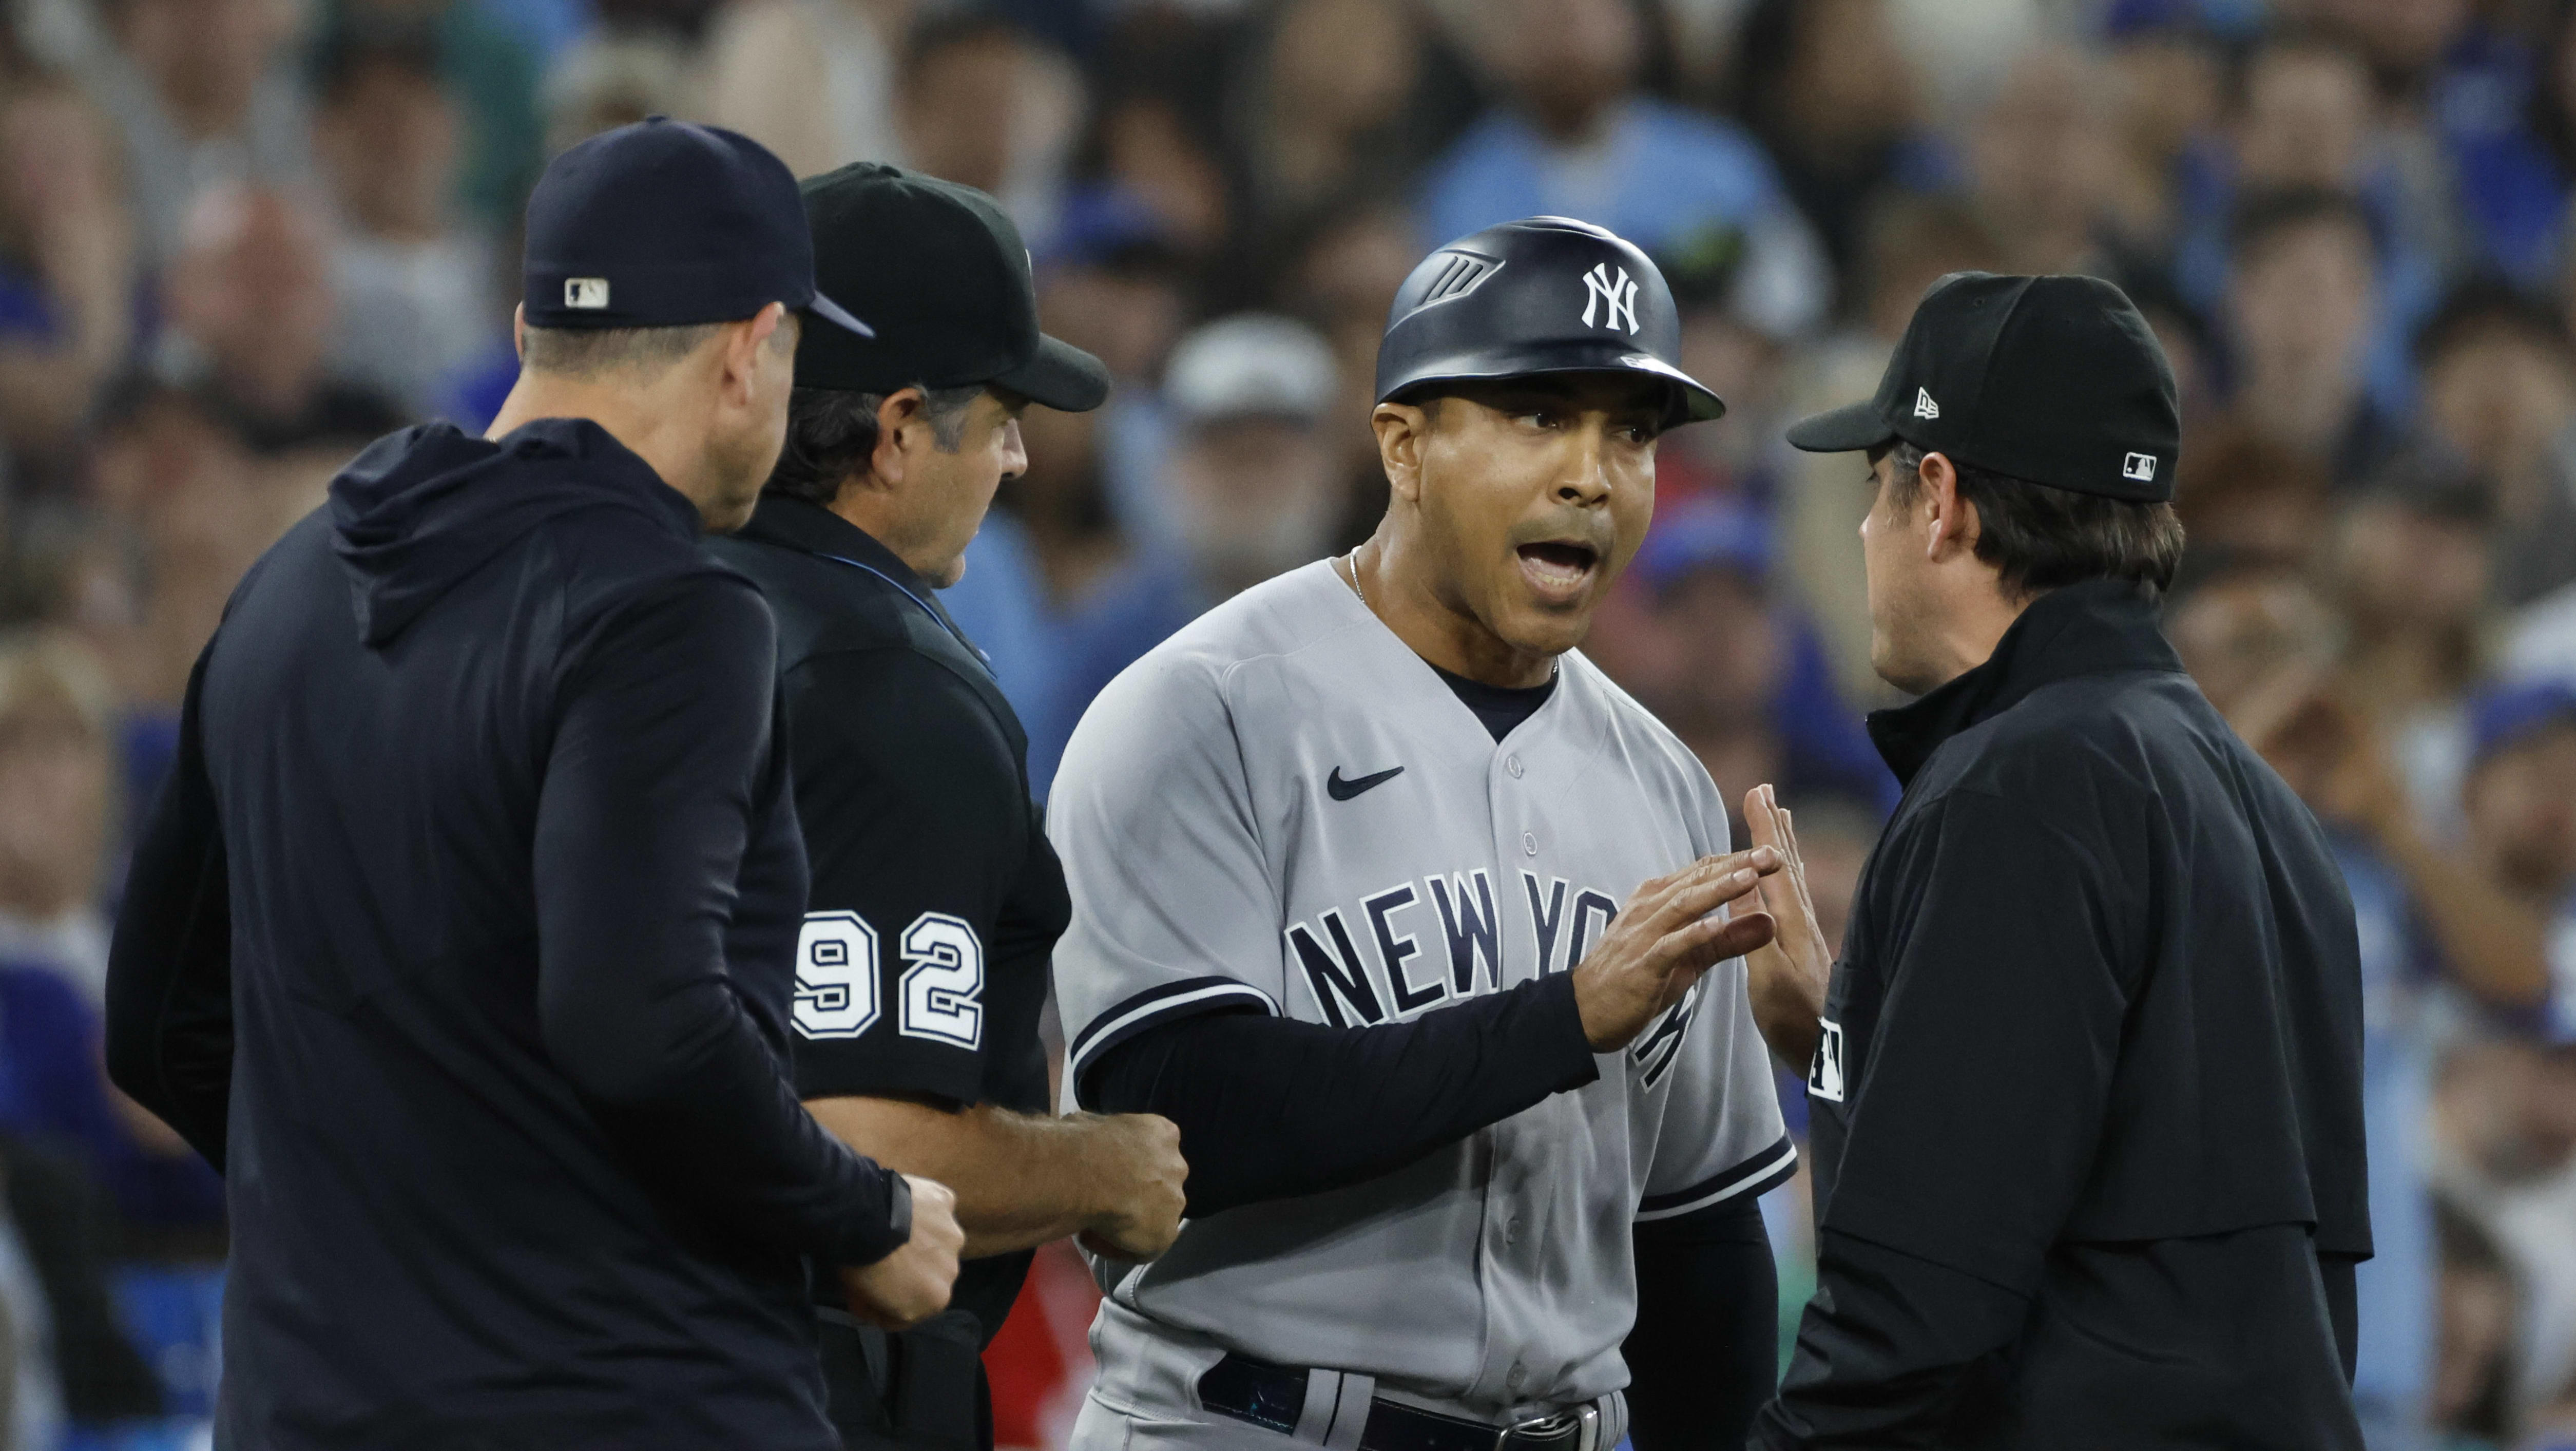 Domingo Germán ejected after substance check